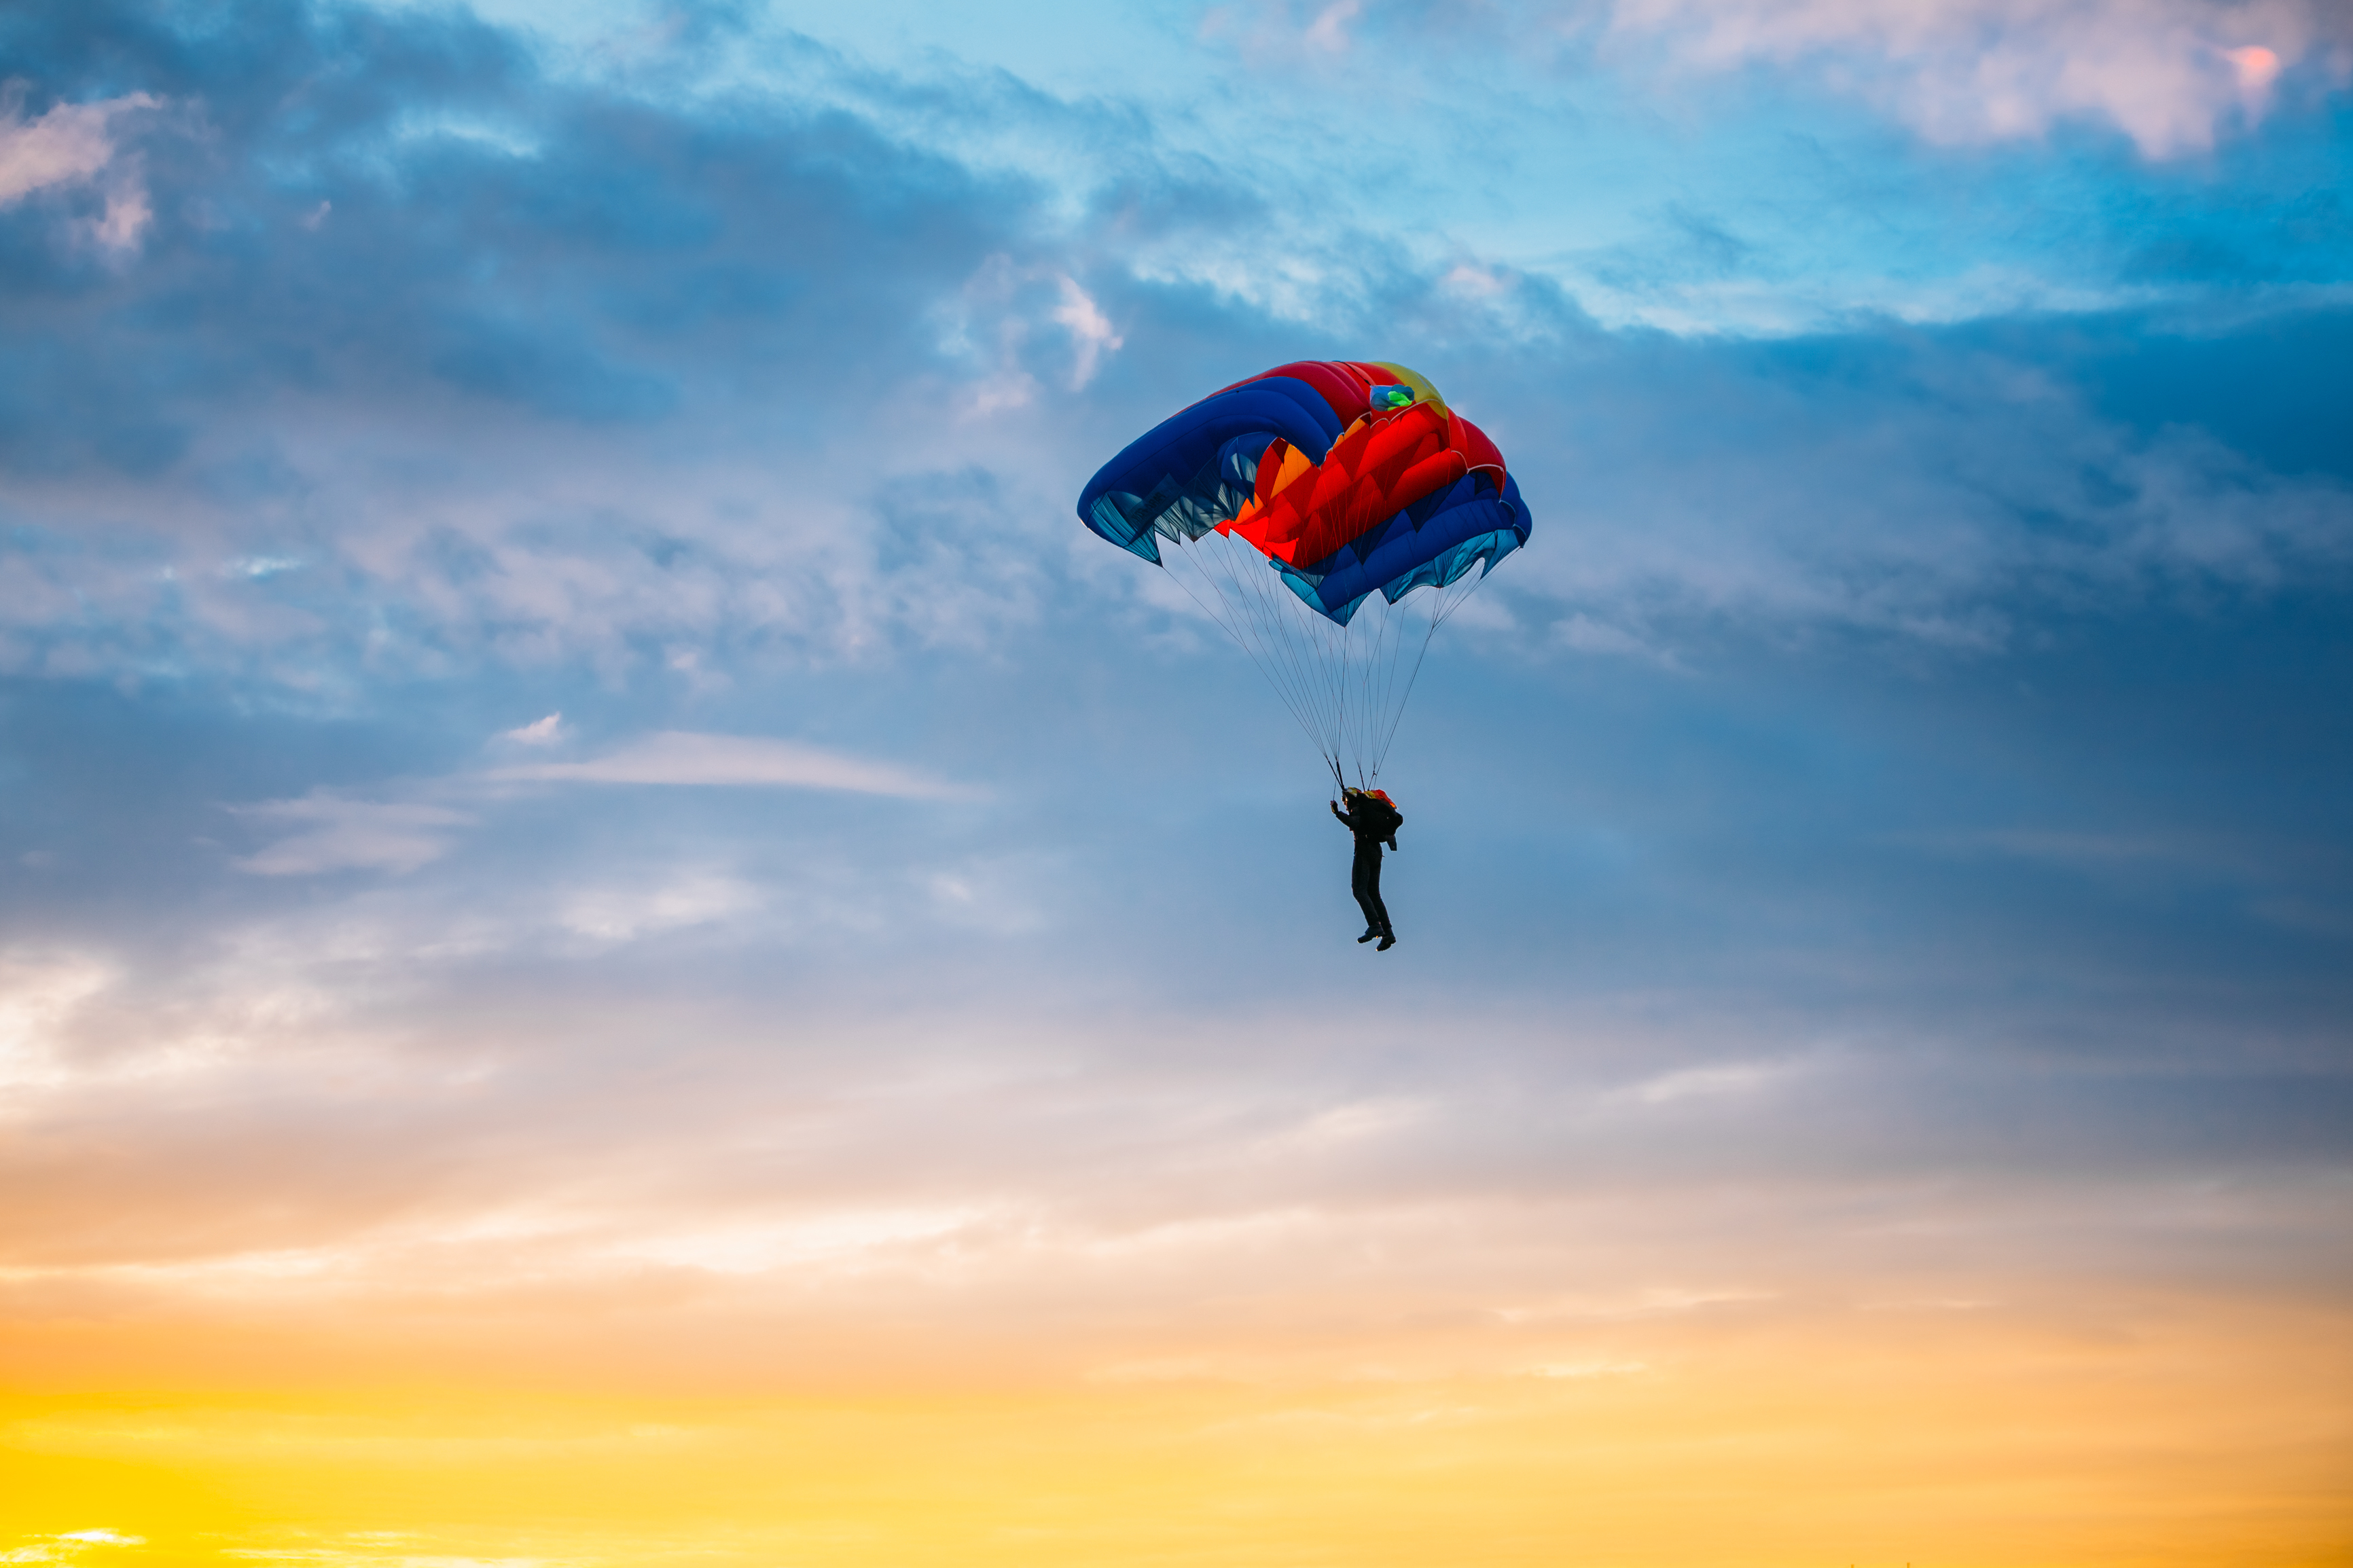 Skydiver On Colorful Parachute In Sunny Sky RateMDs Health News